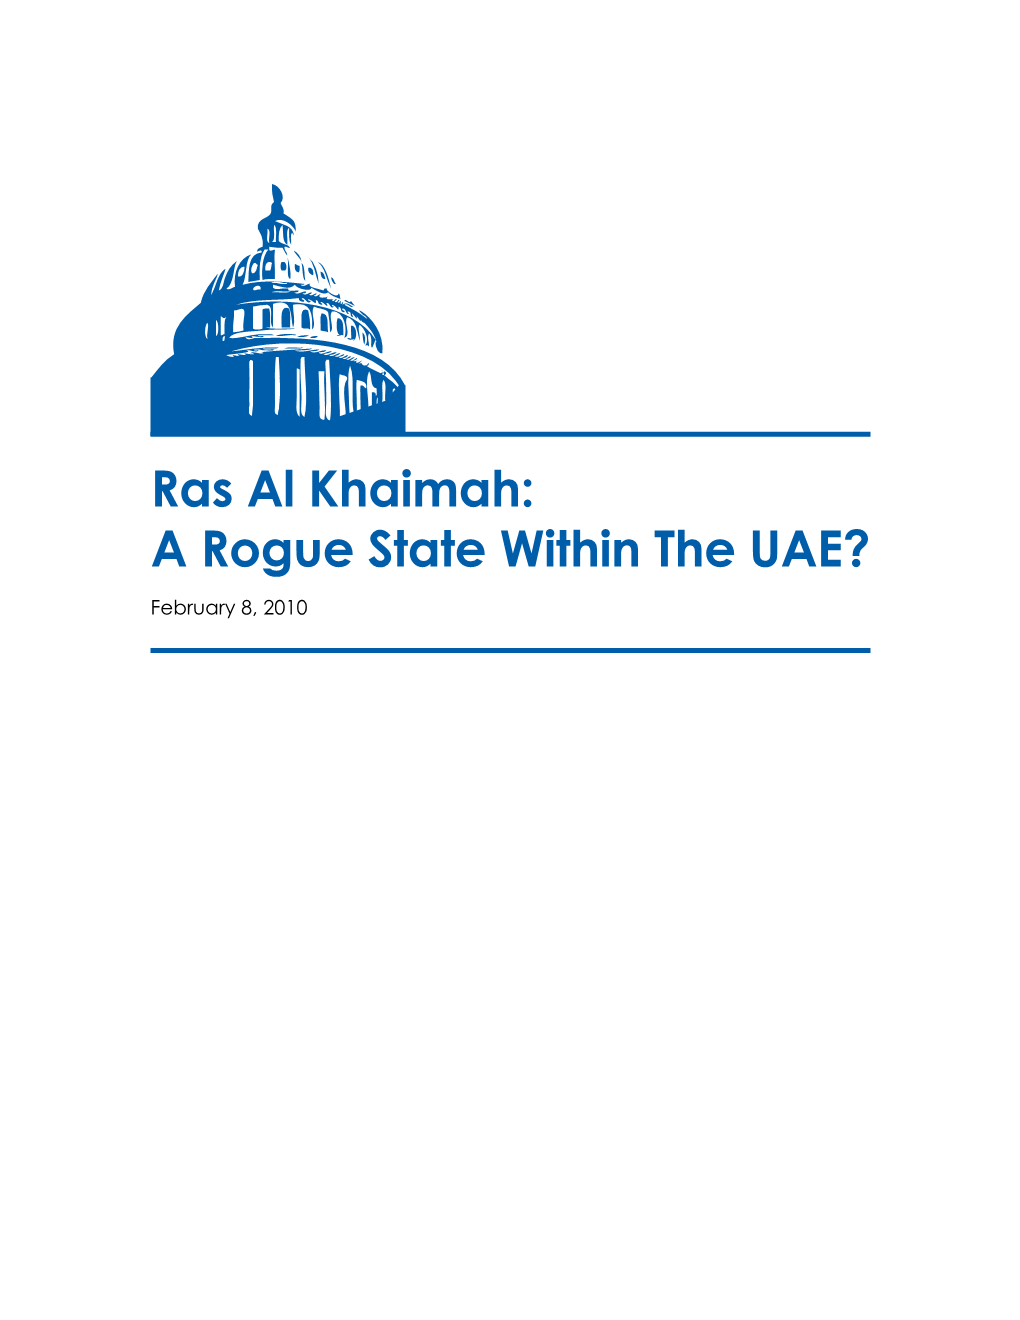 A Rogue State Within the UAE?